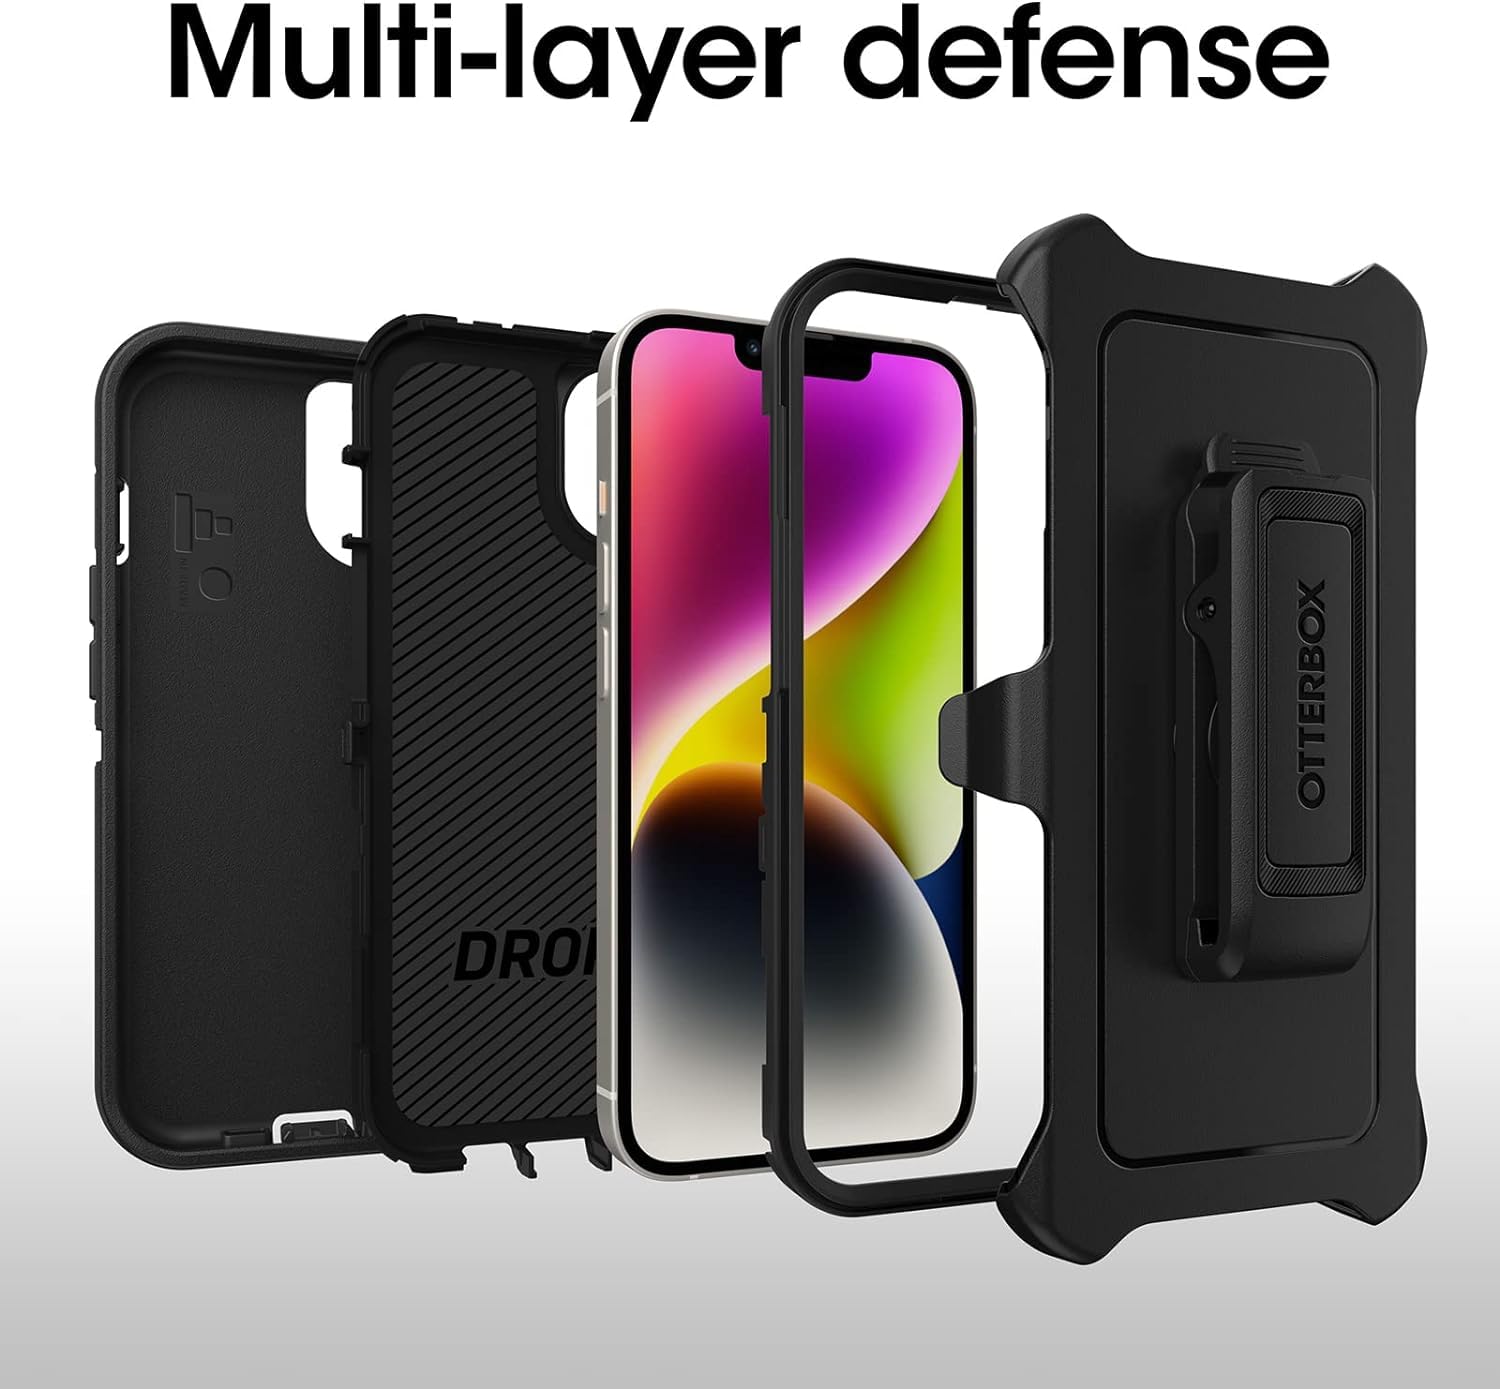 OtterBox iPhone 14 & iPhone 13 (Only) Defender Series Case - Realtree Edge (Black/Realtree Graphic) - Rugged & Durable - with Port Protection - Includes Holster Clip Kickstand - Non-Retail Packaging